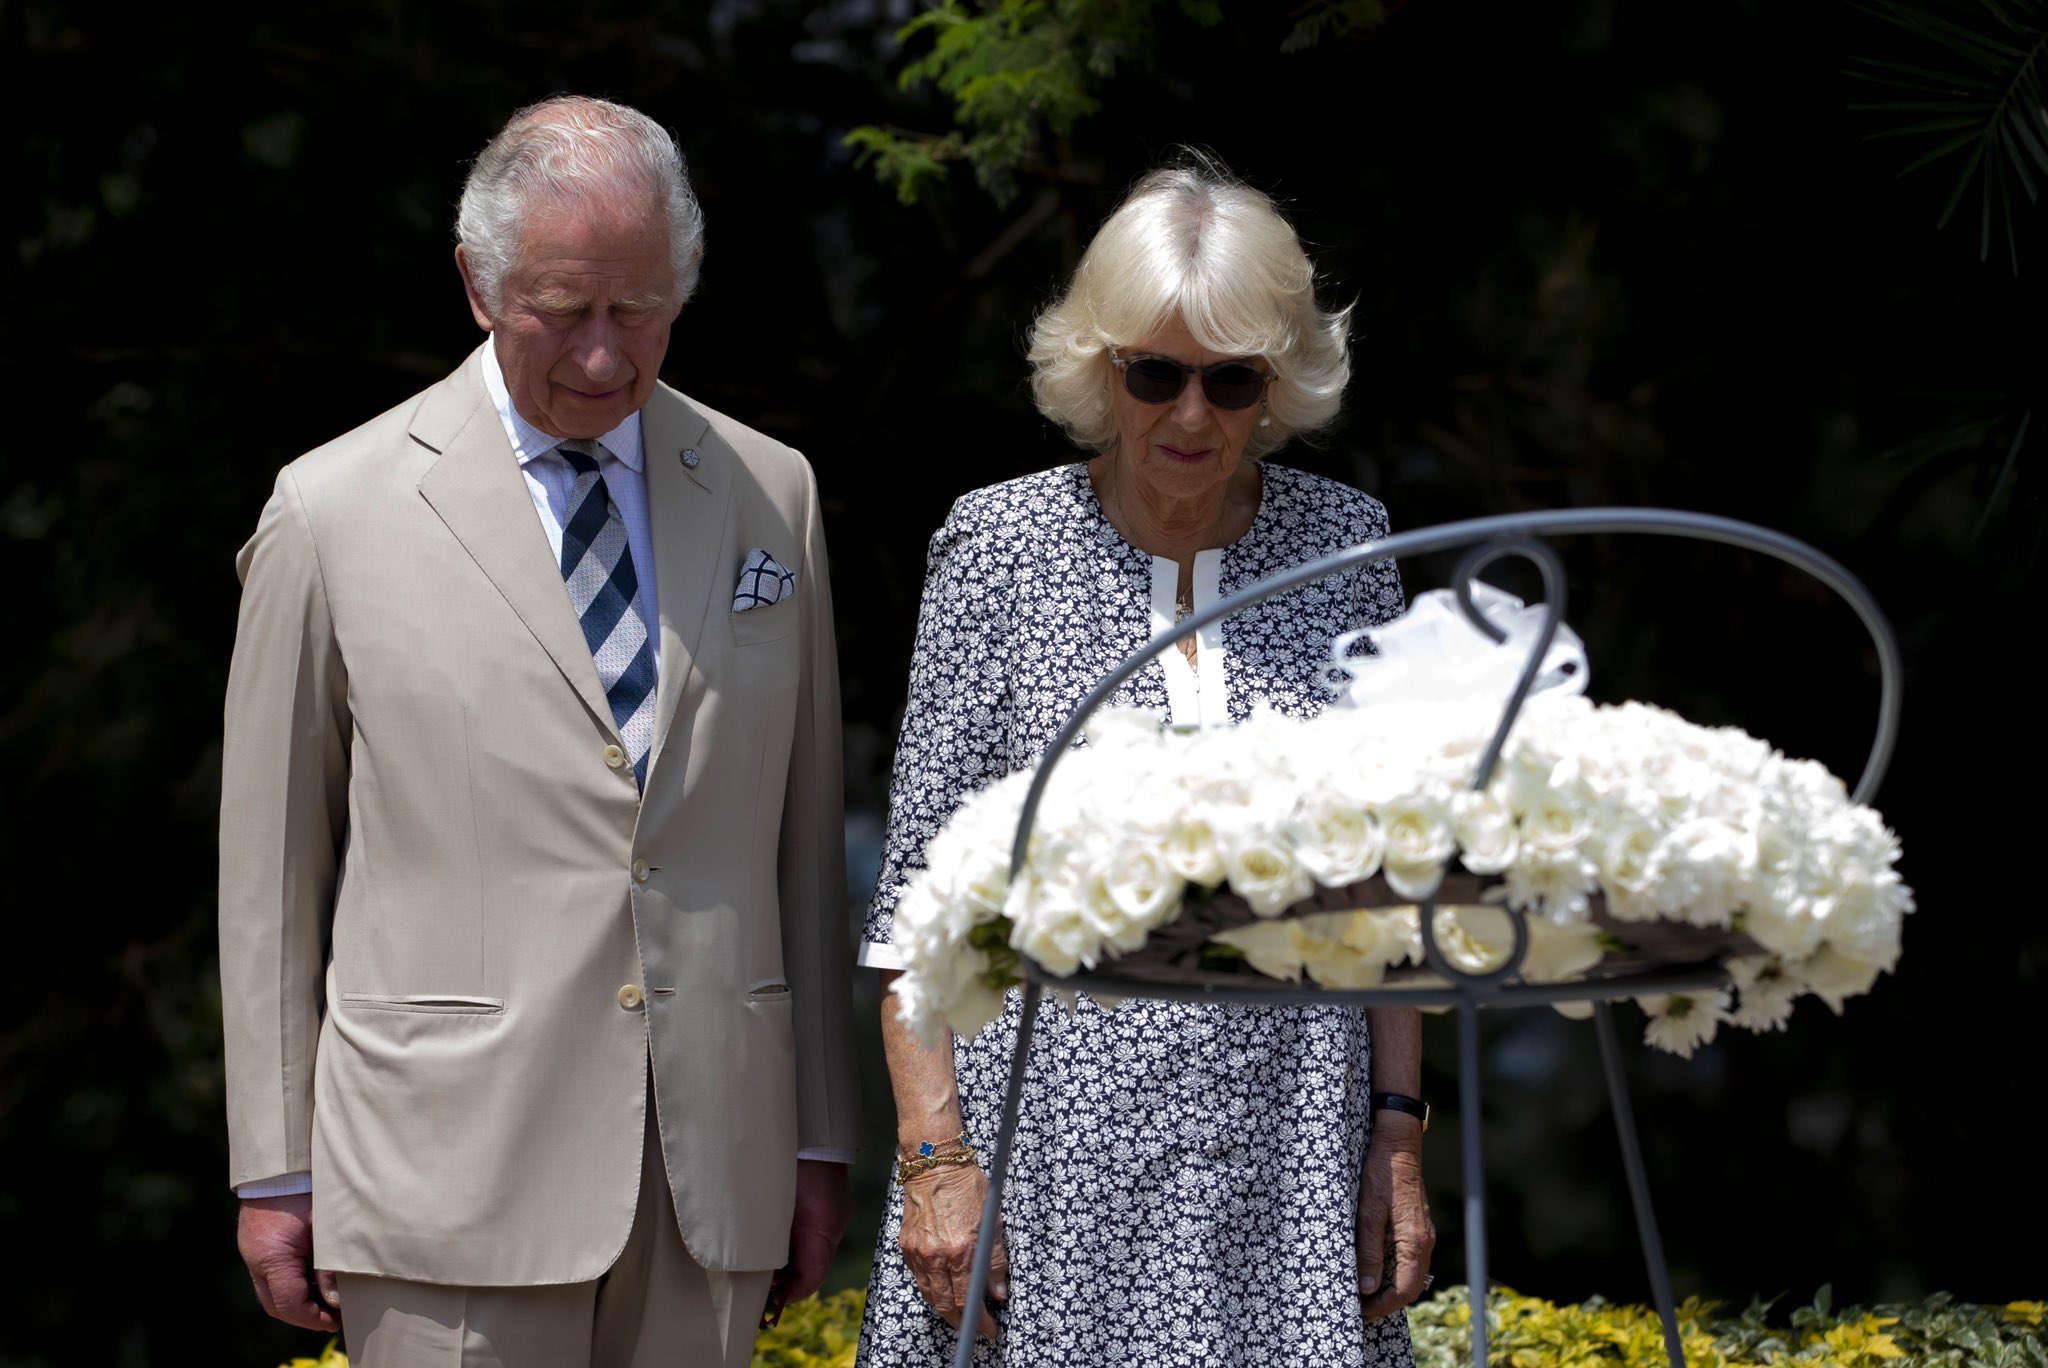 Prince Charles and his wife Camilla, The Duchess of Cornwall, observe a moment of silence in honour of the Genocide victims at Kigali Genocide Memorial on Wednesday, June 22. Photo: Courtesy.